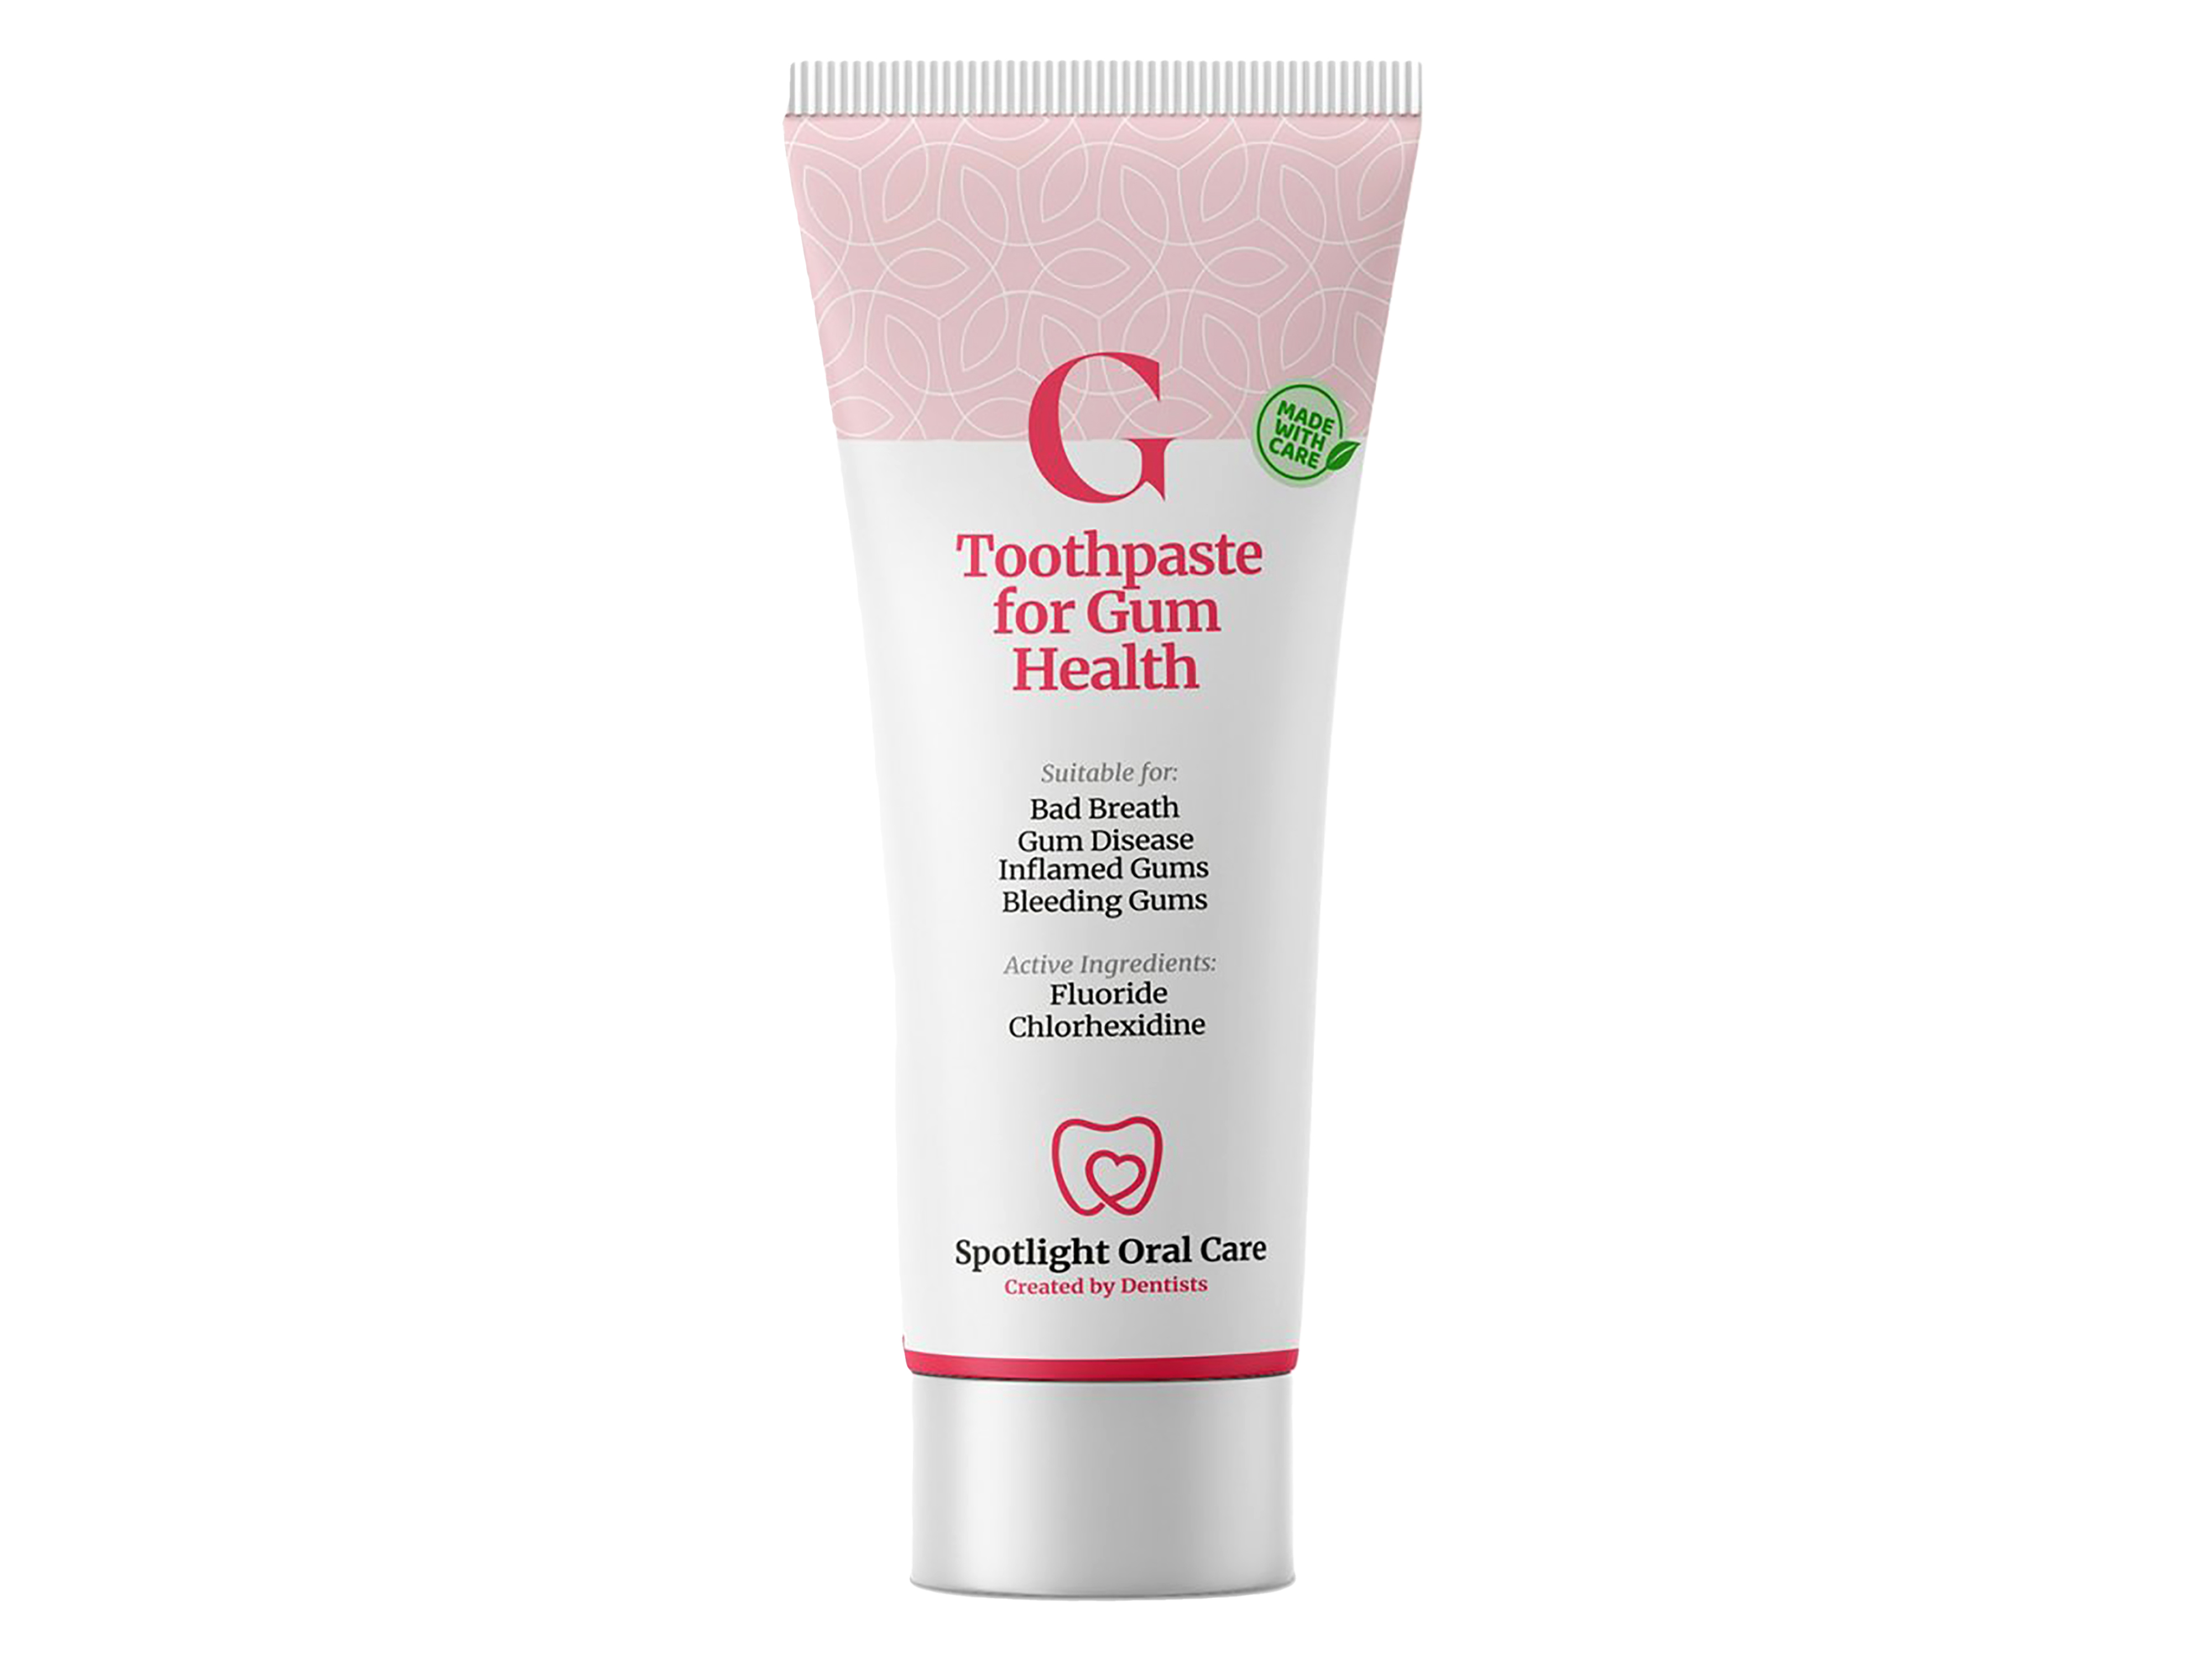 Spotlight Oral Care Toothpaste for Gum Health, 100 ml